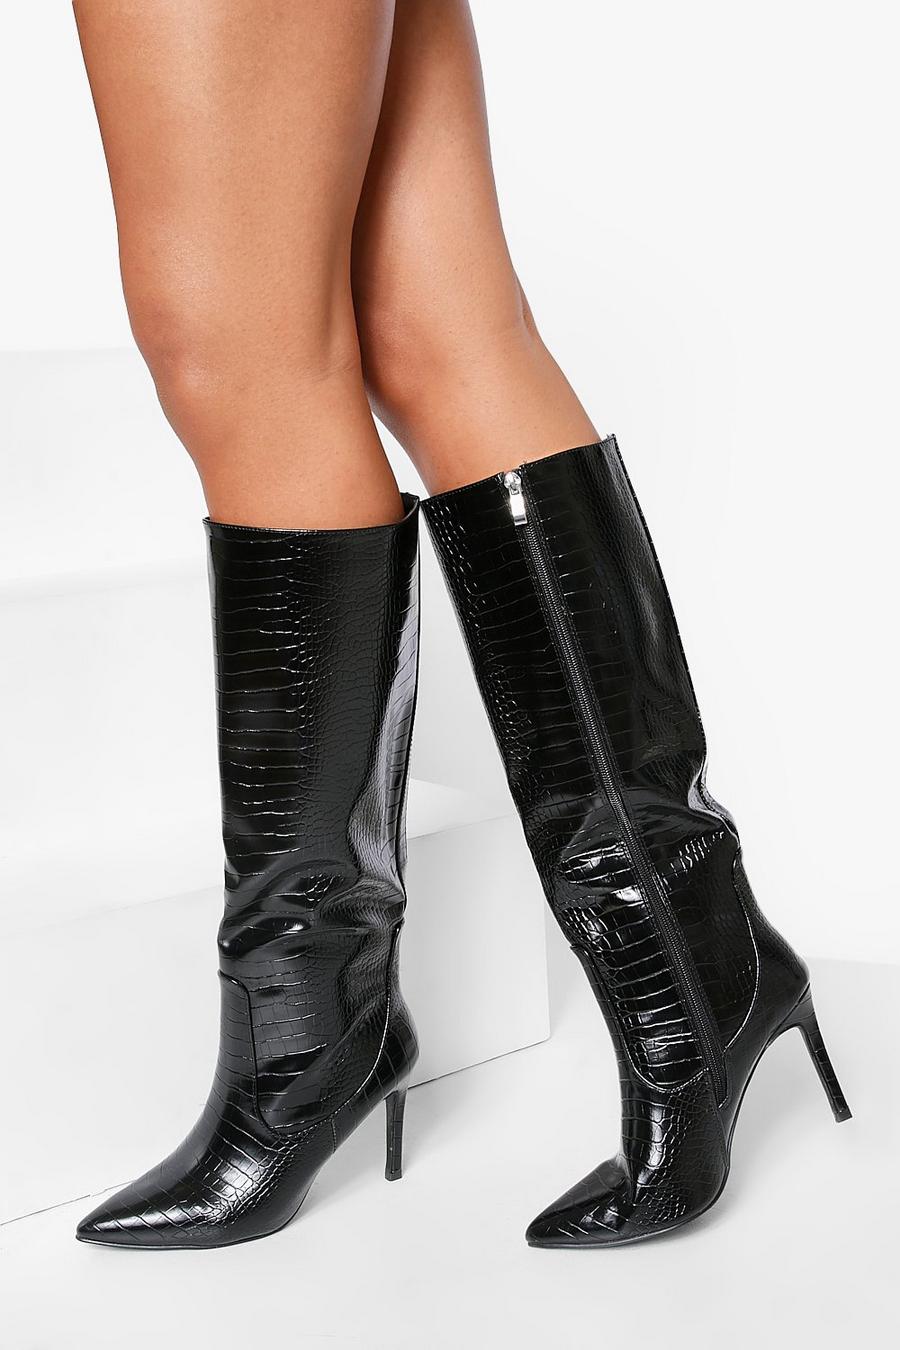 Black Croc Pointed Toe Knee High Boots image number 1